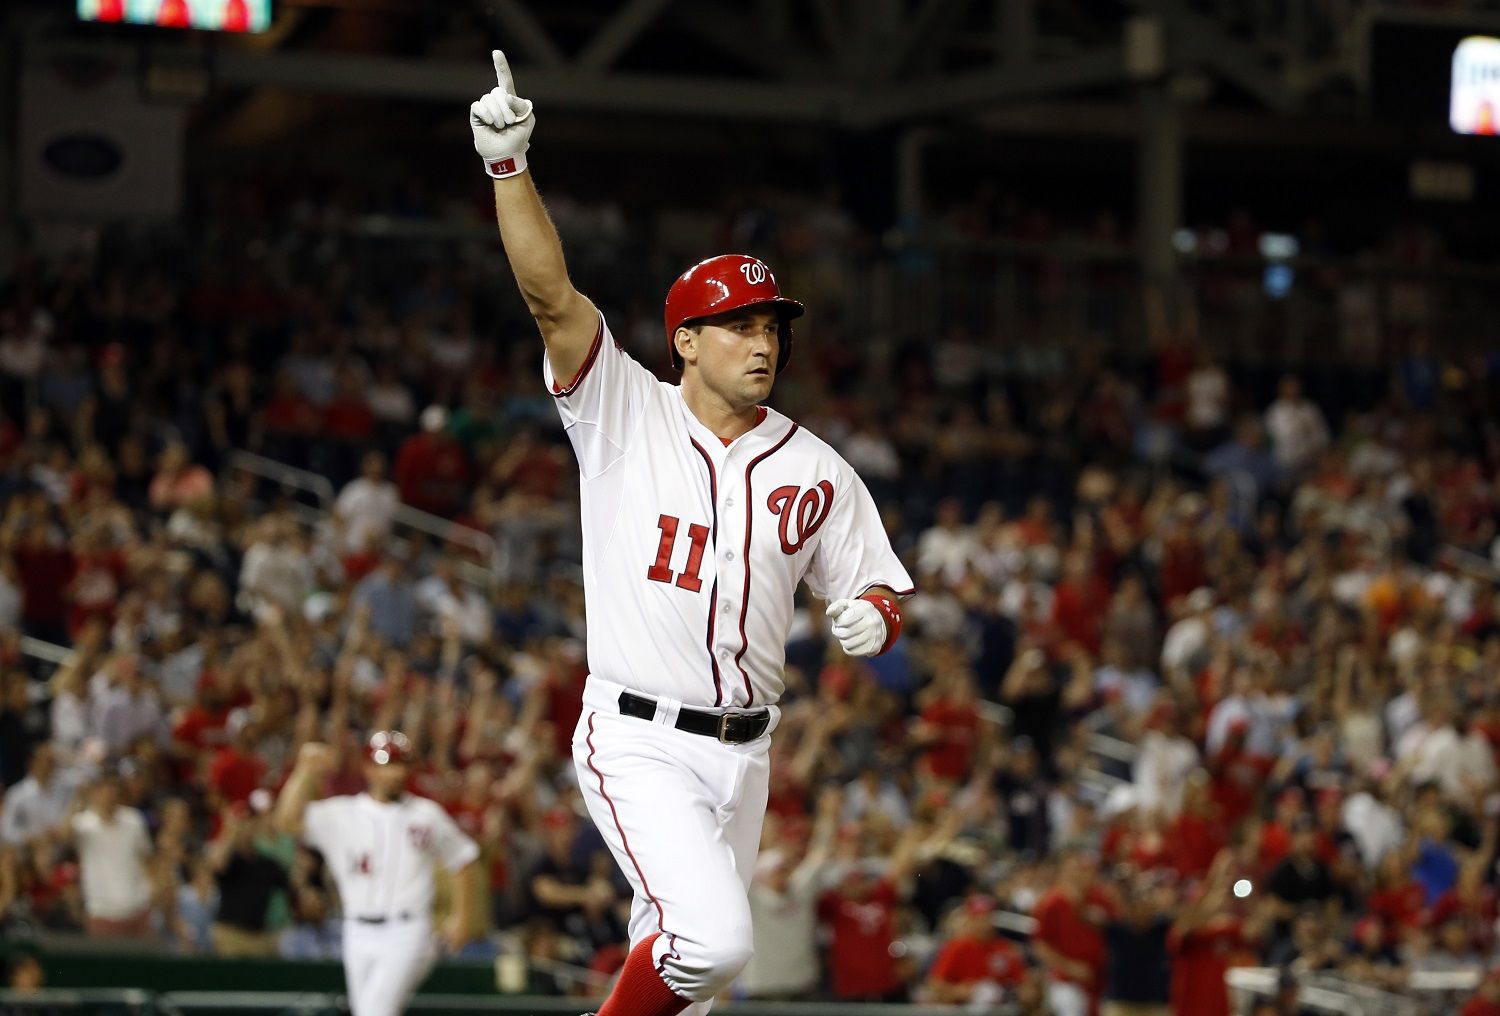 Washington Nationals' Ryan Zimmerman (11) celebrates as he runs the bases for his two-run walk-off home run during the 10th inning of an interleague baseball game against the New York Yankees at Nationals Park, Tuesday, May 19, 2015, in Washington. The Nationals won 8-6 in 10 innings. (AP Photo/Alex Brandon)